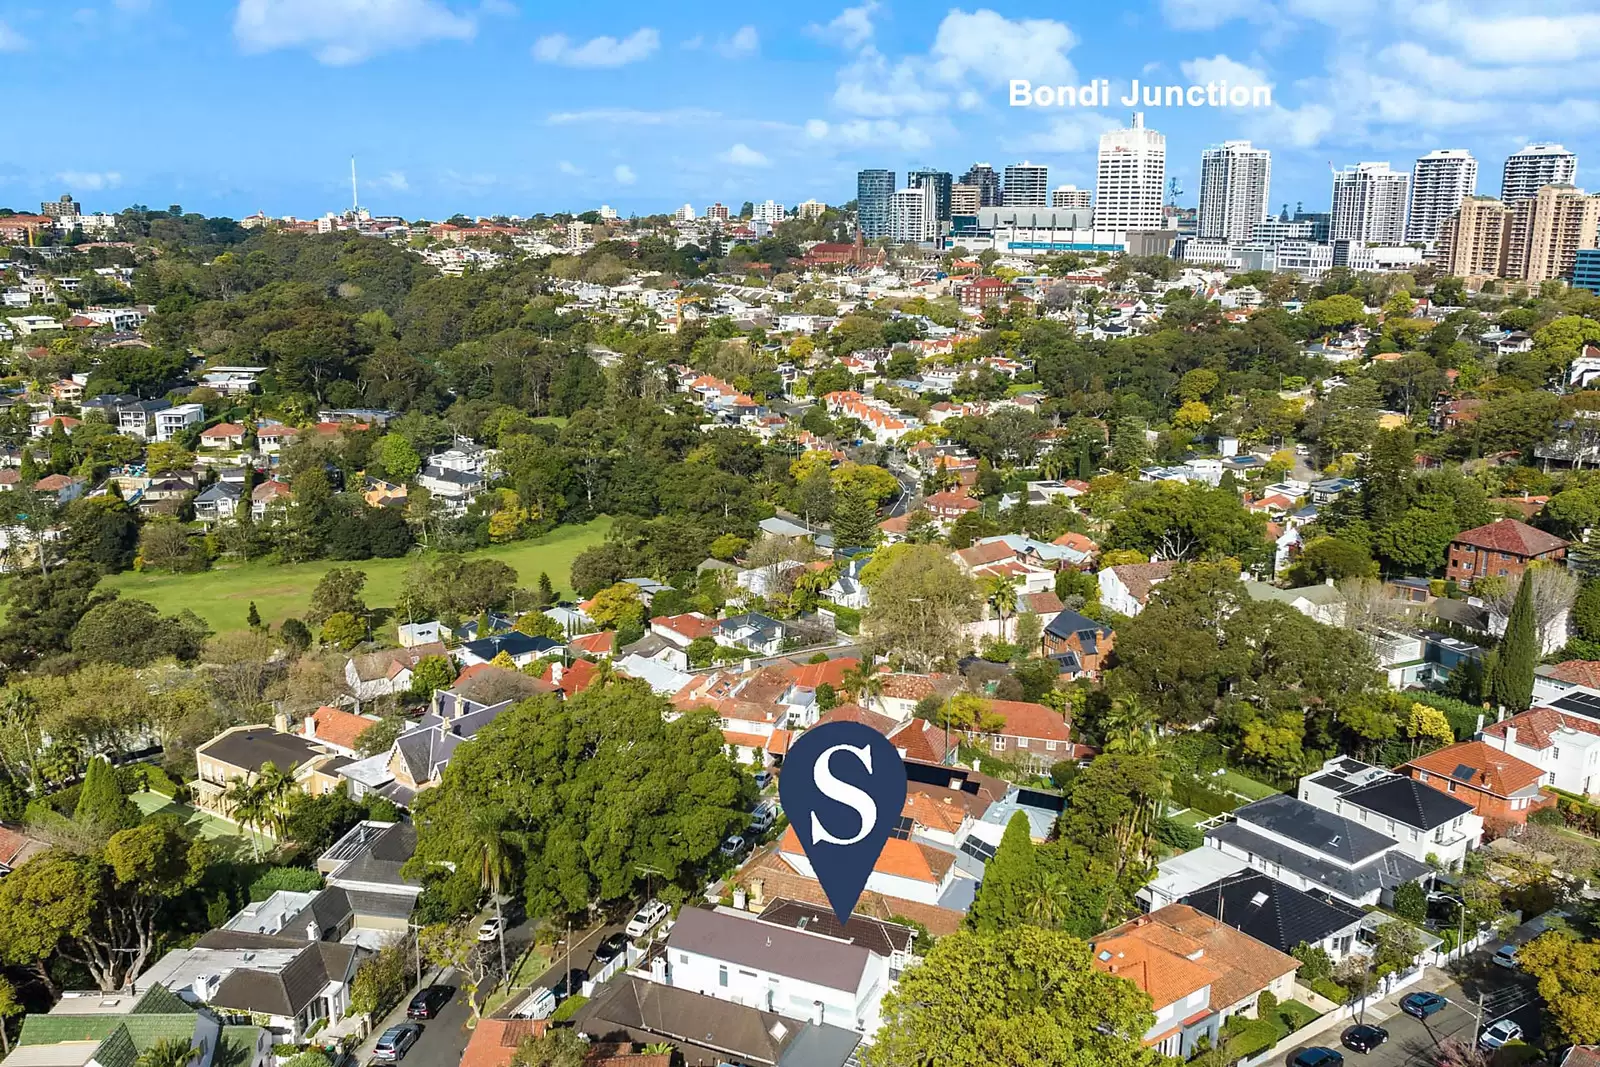 Photo #17: 15 Roslyndale Avenue, Woollahra - Sold by Sydney Sotheby's International Realty